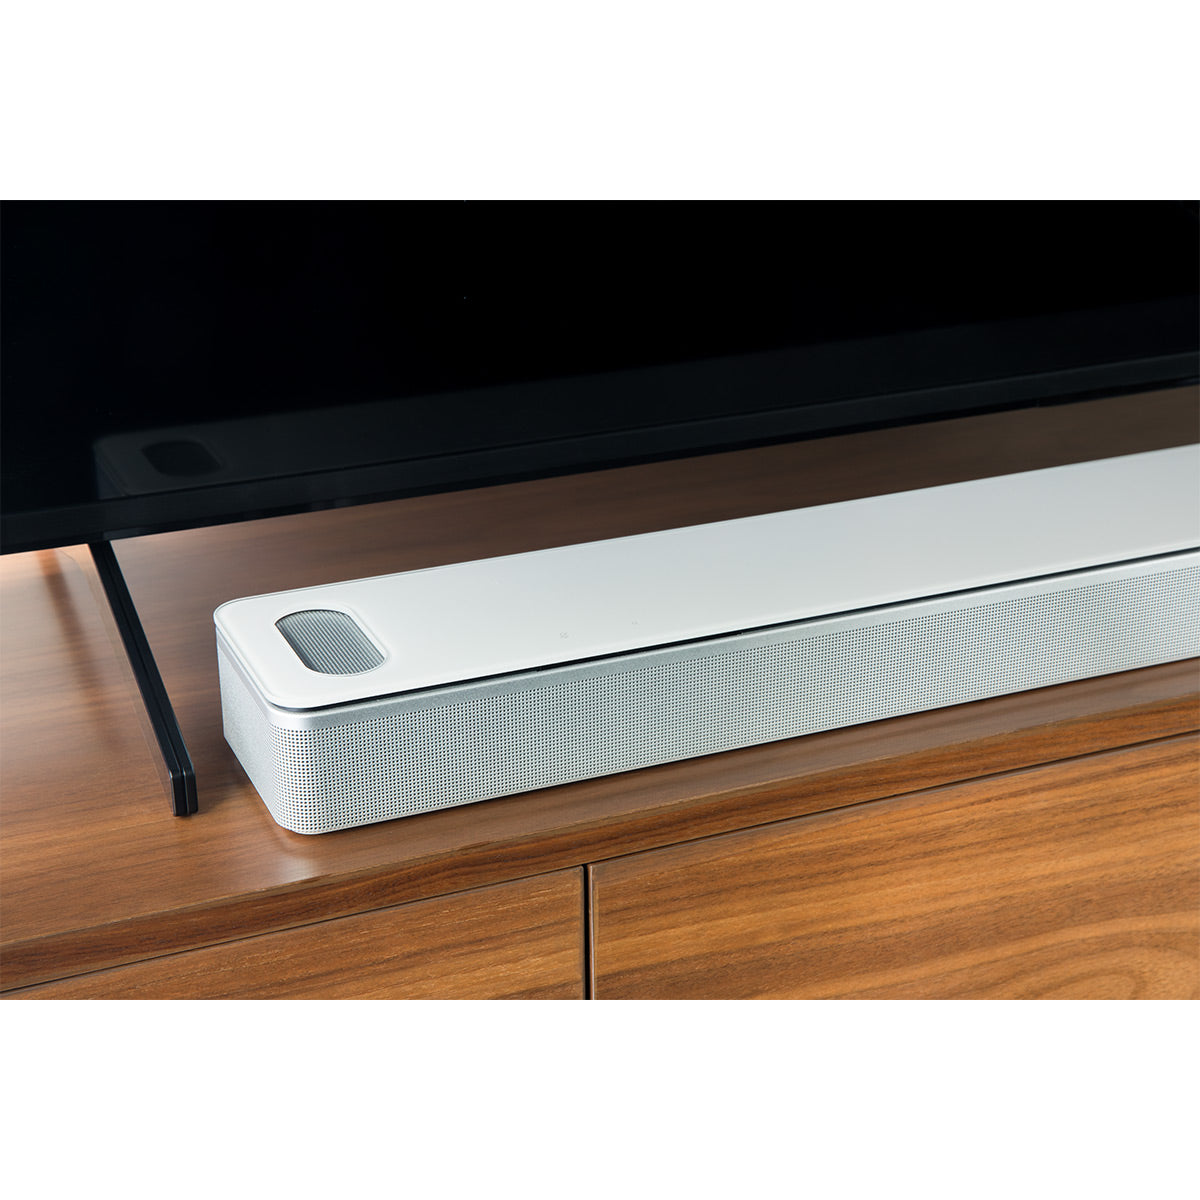 Bose Smart Soundbar Dolby Atmos | Voice with and Assistant Alexa 900 Wide Stereo Google Control World (White)